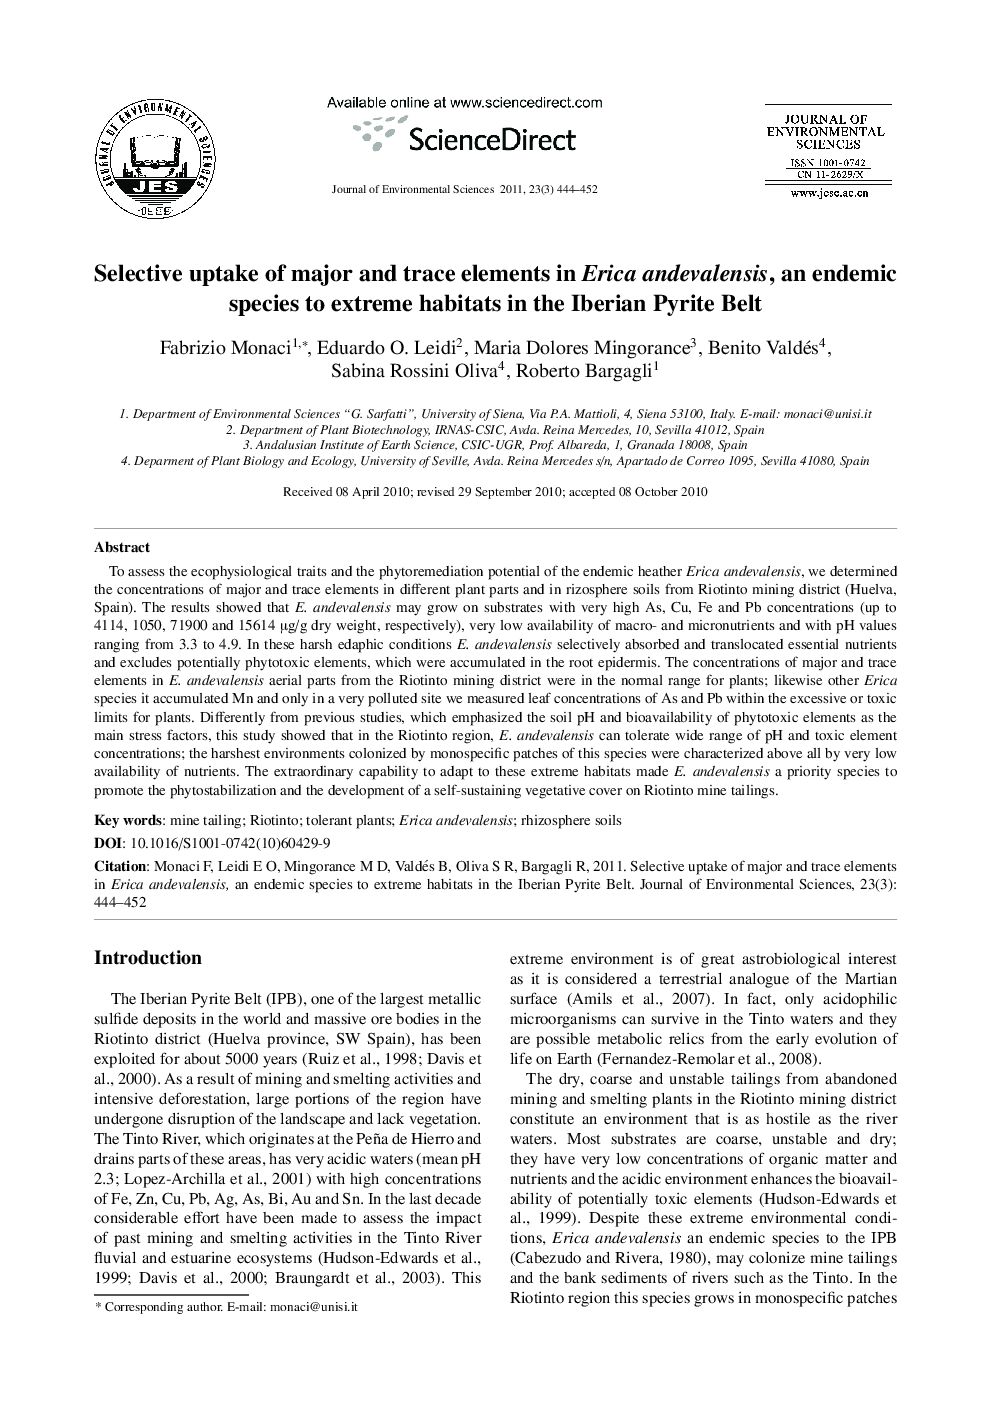 Selective uptake of major and trace elements in Erica andevalensis, an endemic species to extreme habitats in the Iberian Pyrite Belt